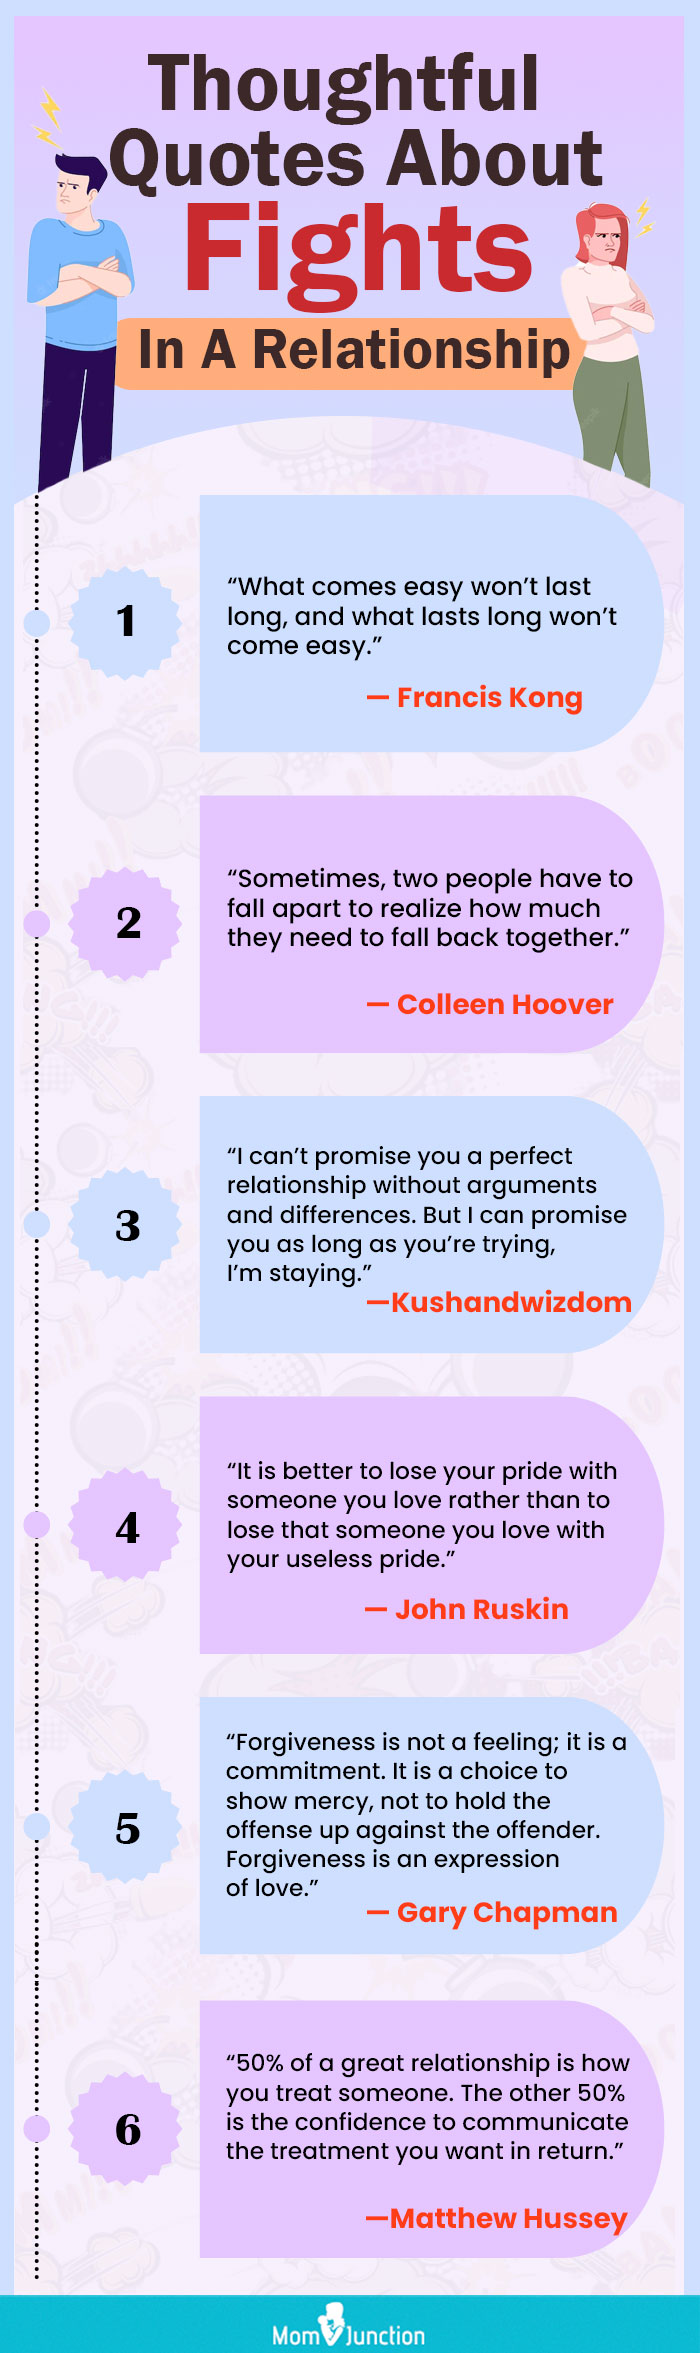 thoughtful quotes about fights in a relationship [infographic]